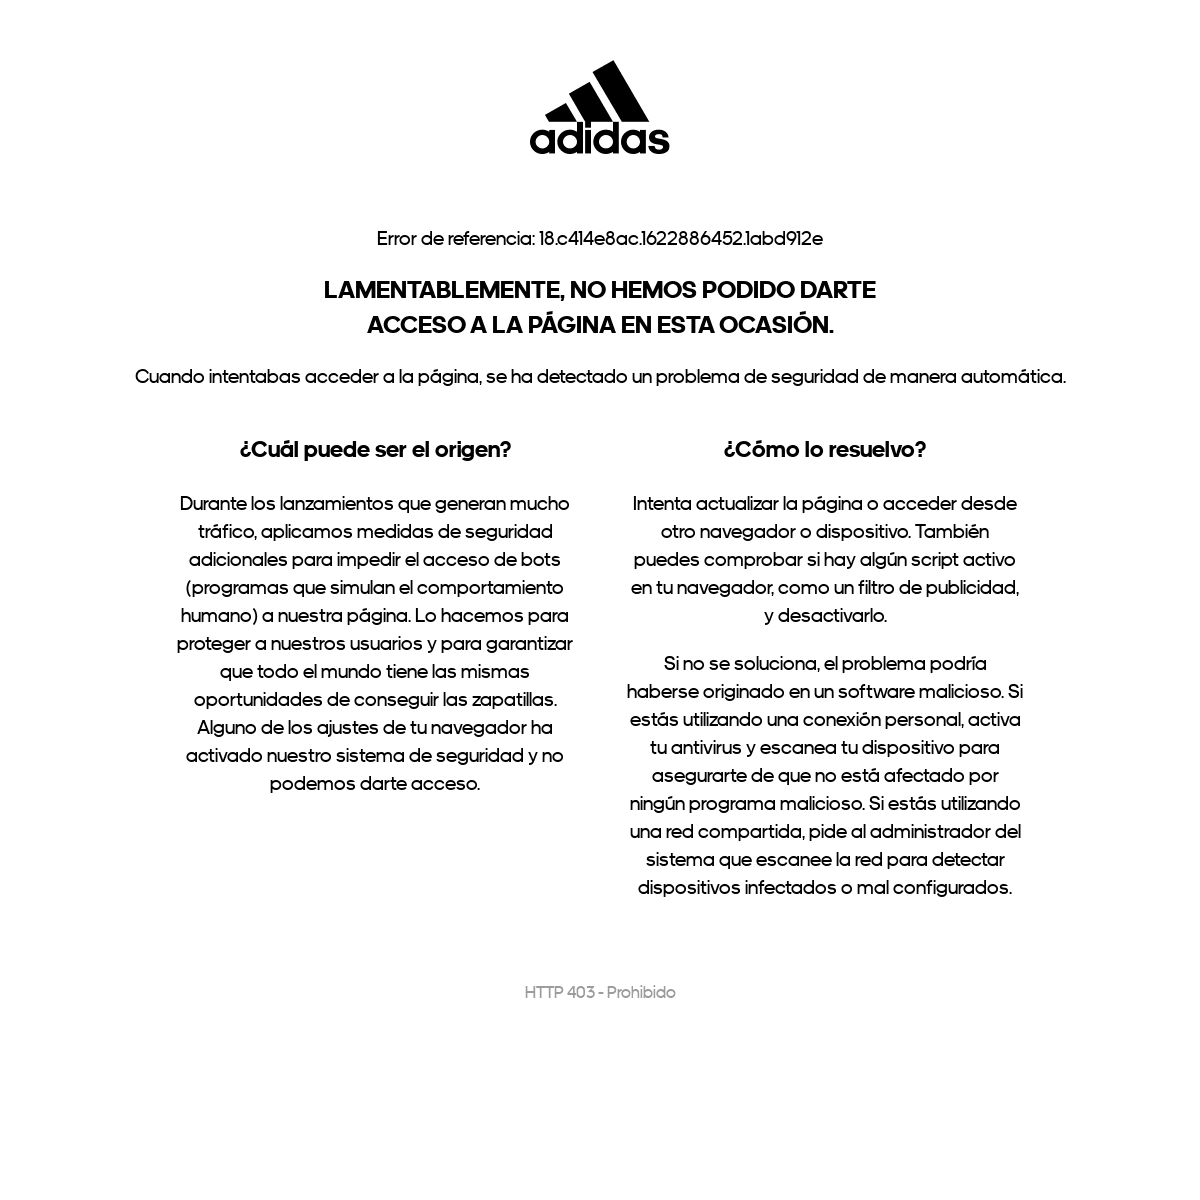 A complete backup of https://adidas.es